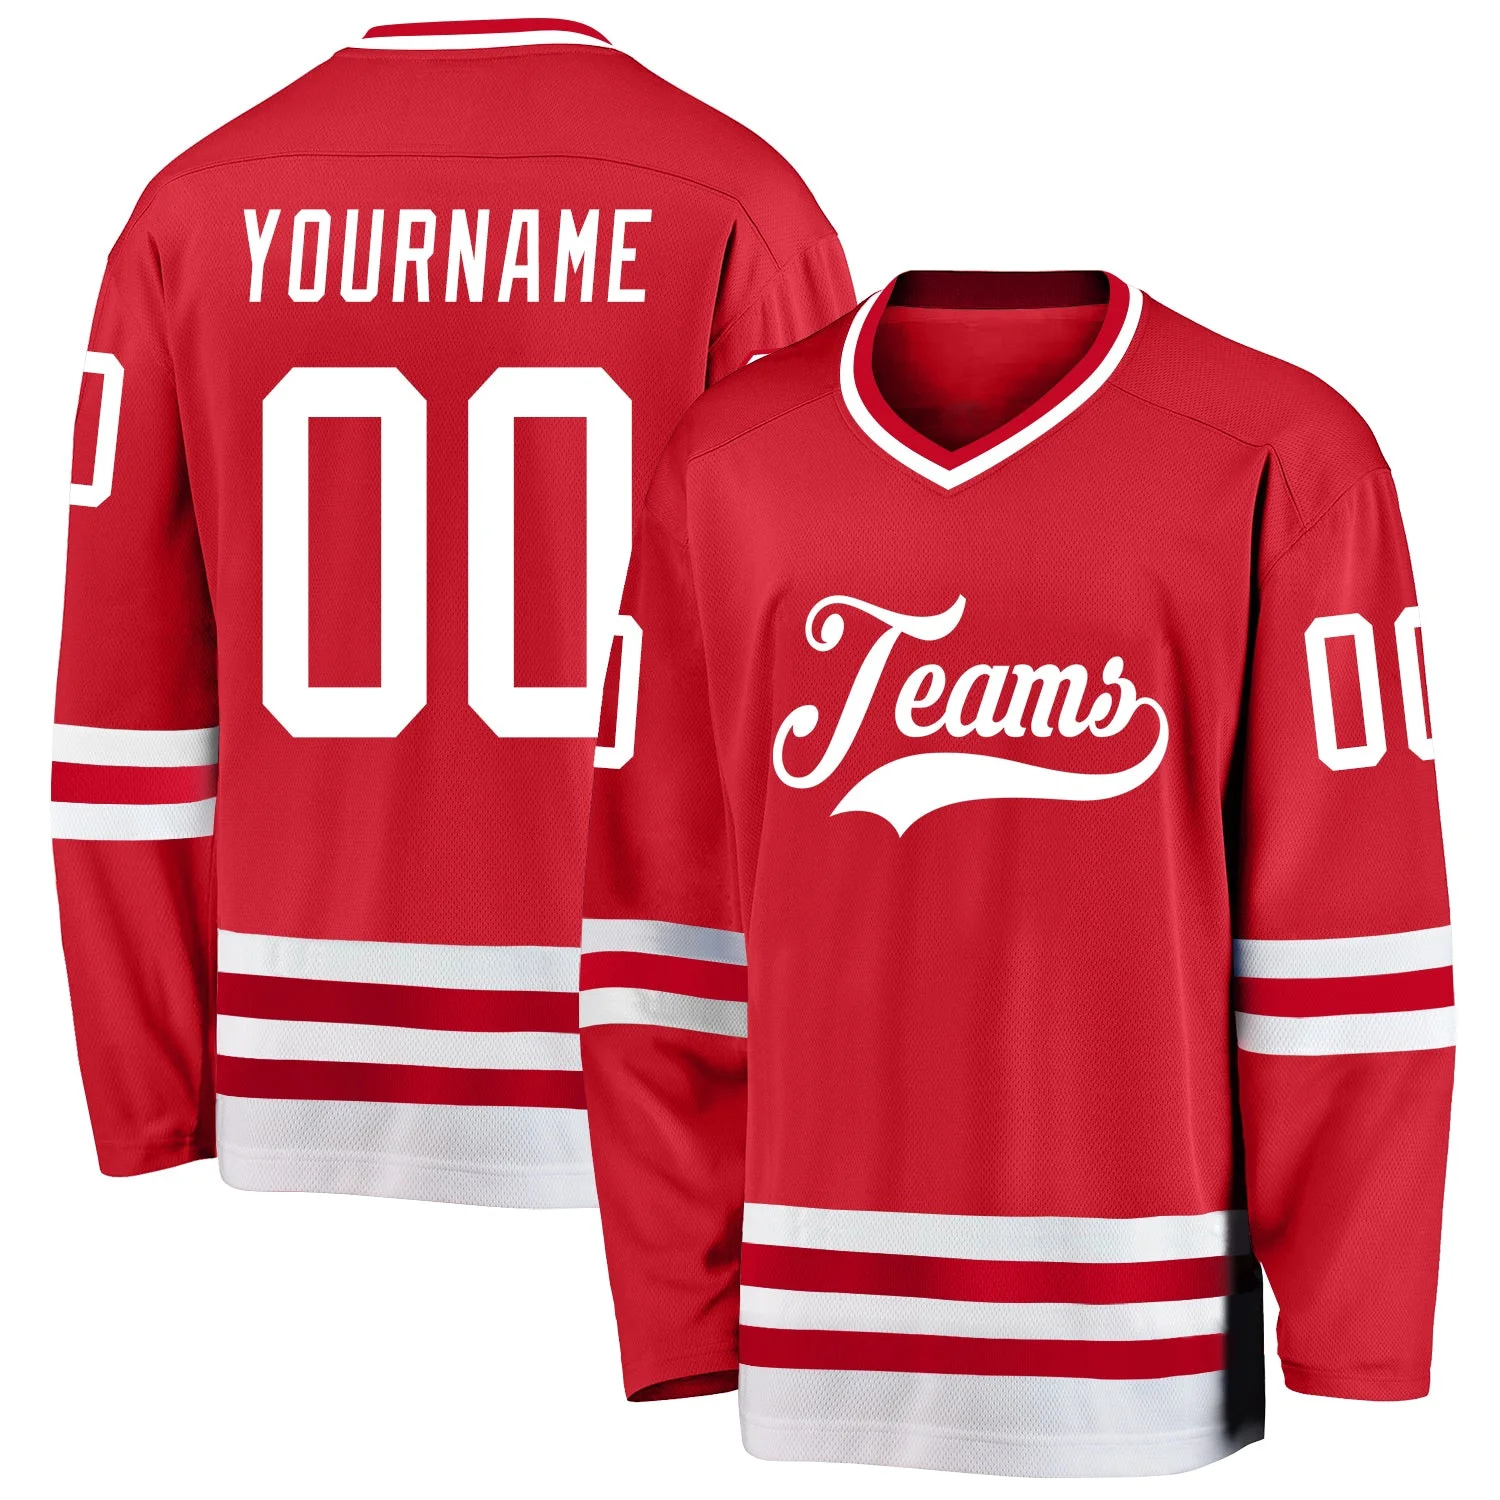 Stitched And Print Red White Hockey Jersey Custom